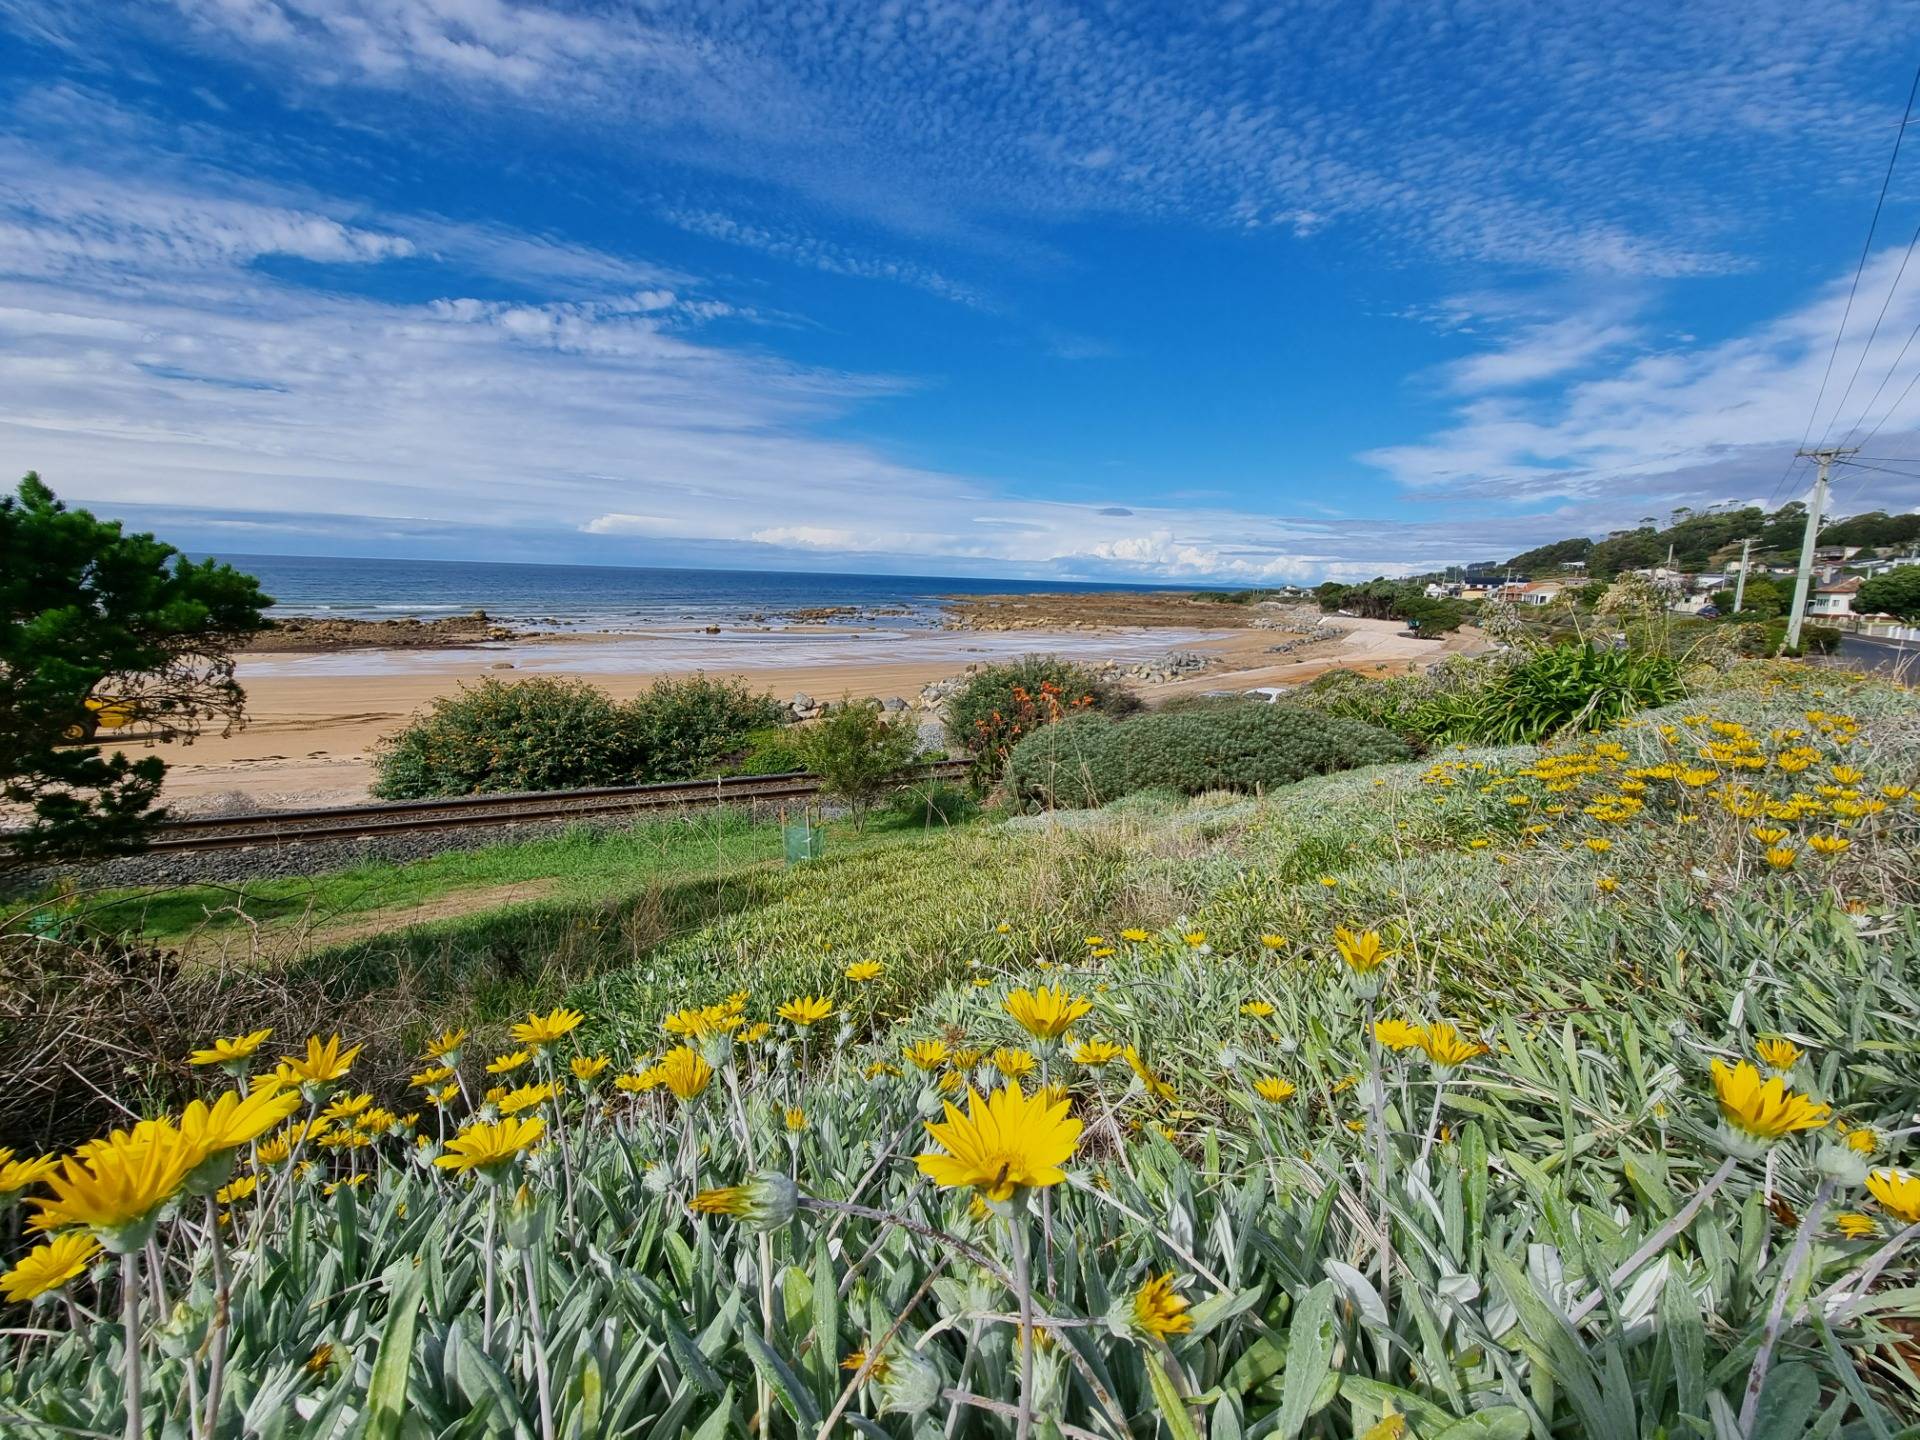 The same Watson’s beach with different lovely flowers in the foreground. You can see the train line that runs right by people’s houses and this beach.